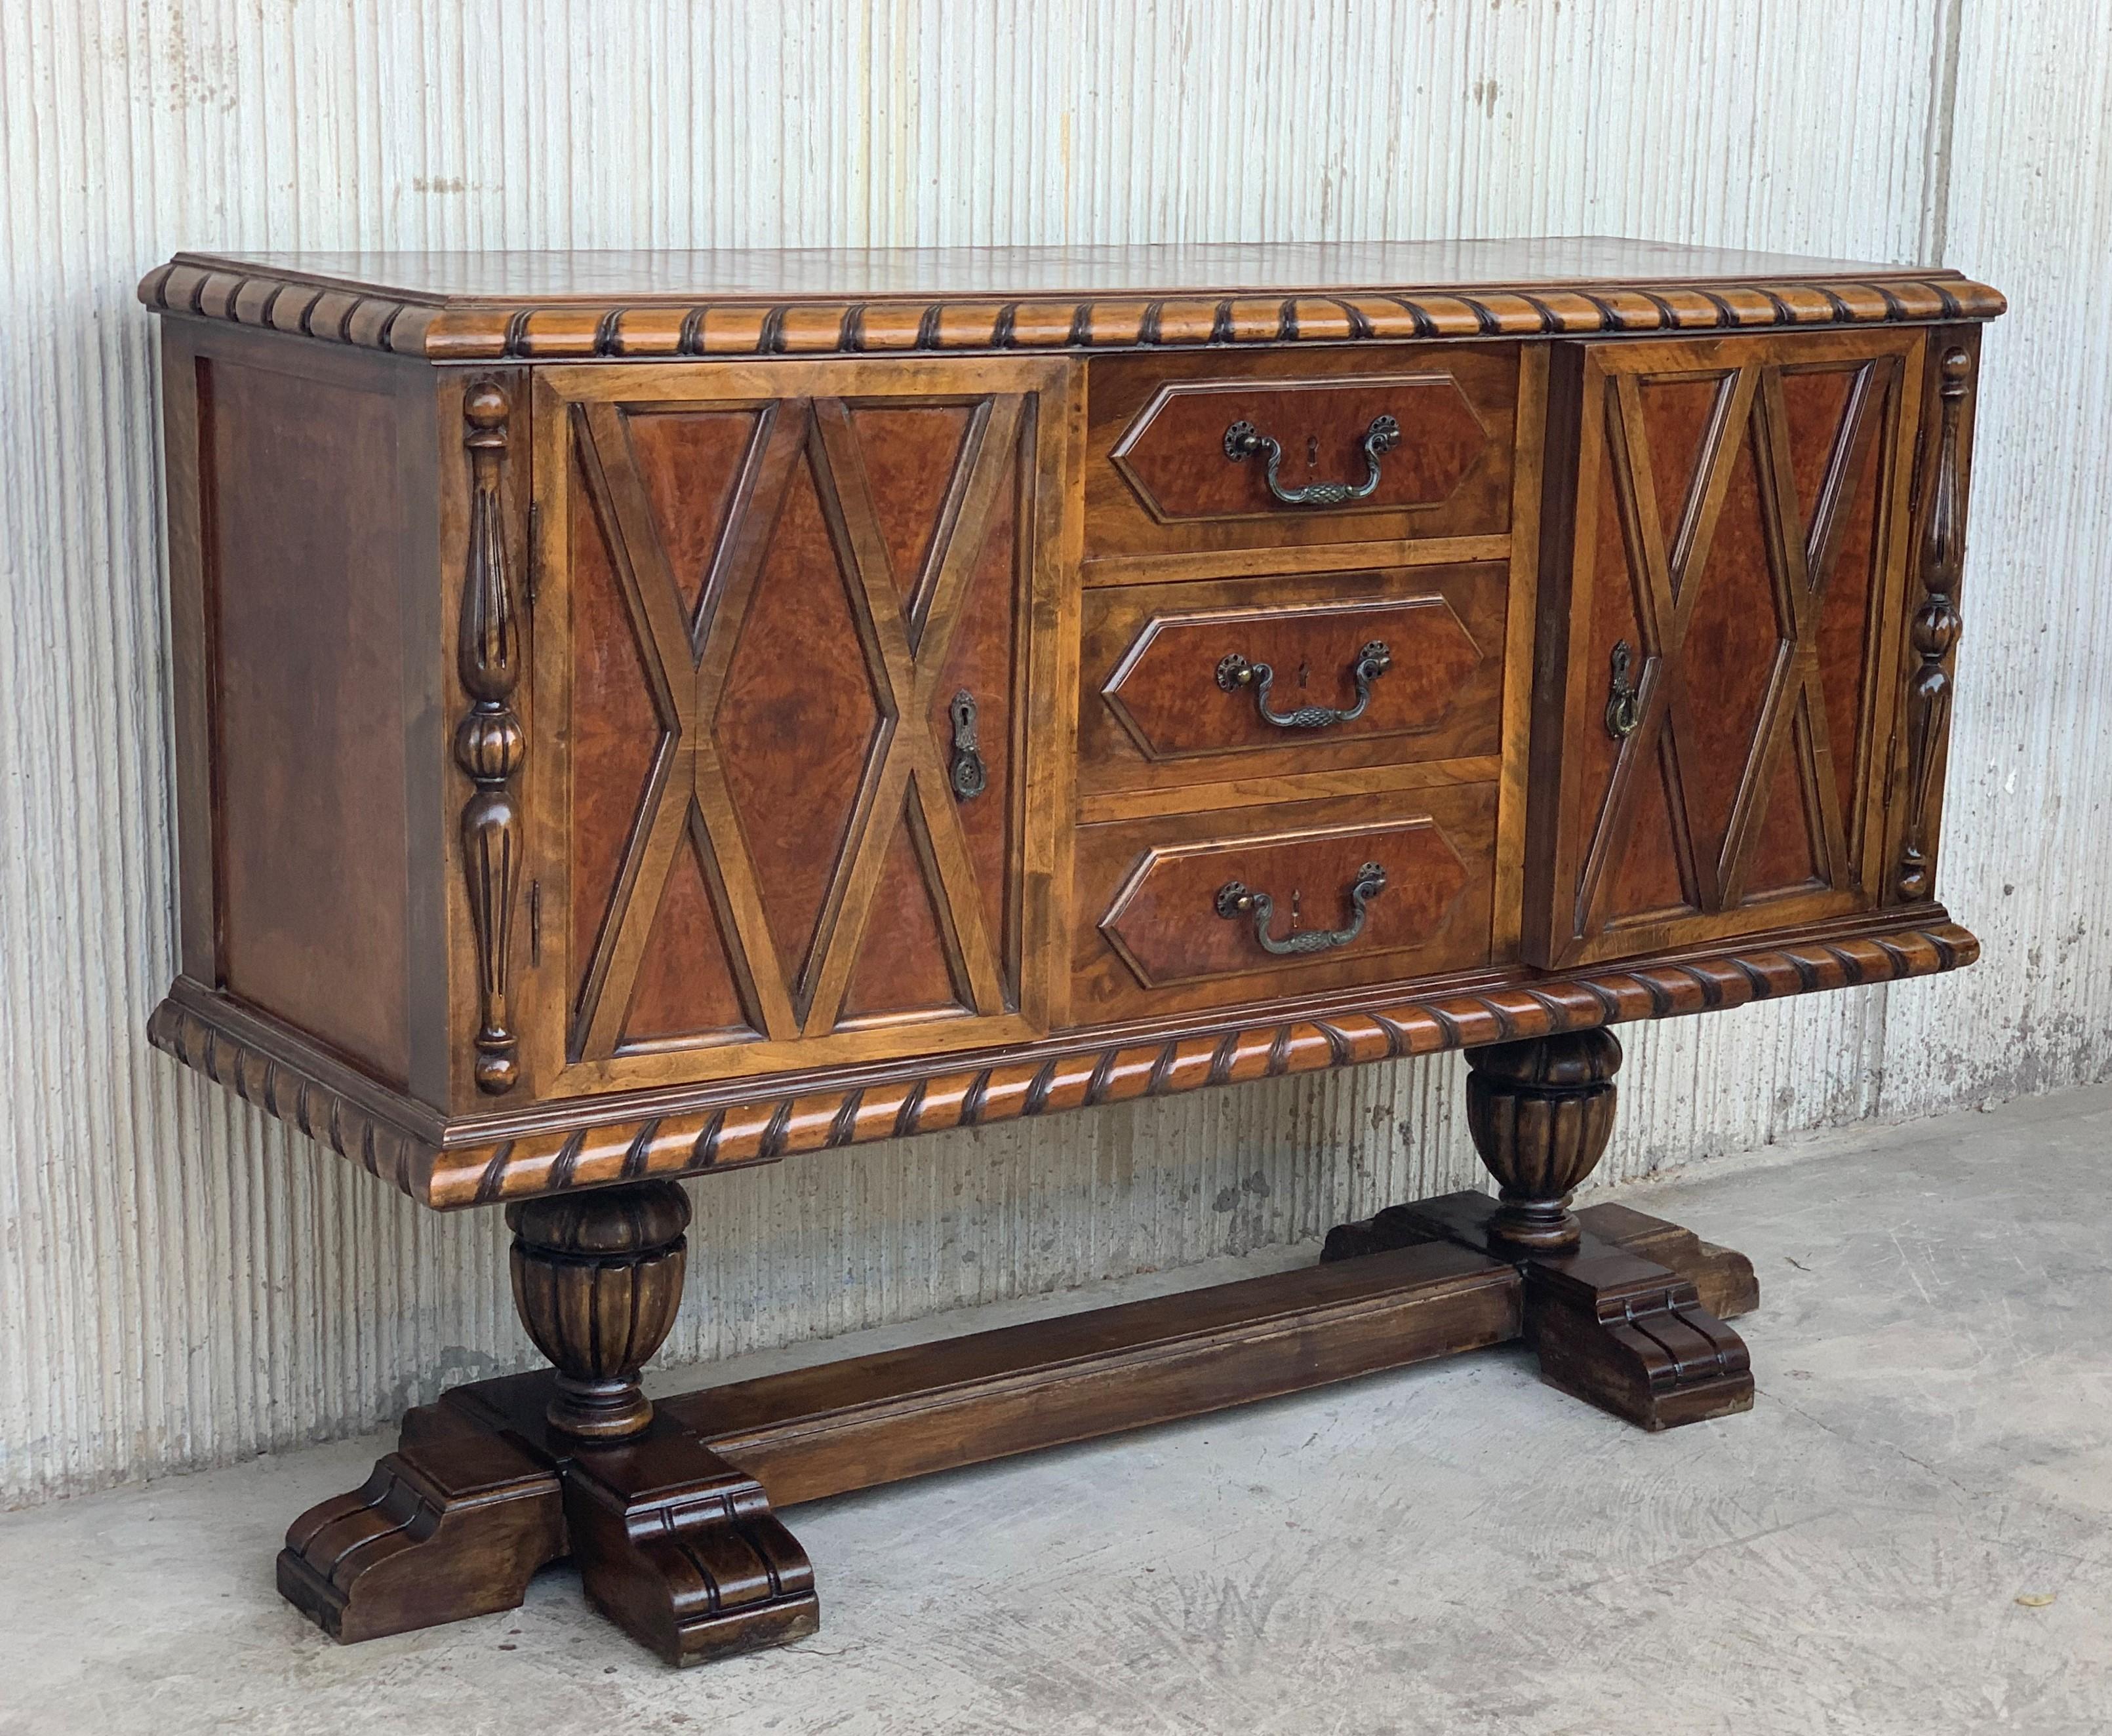 20th century French walnut buffet with two doors and three central drawers.